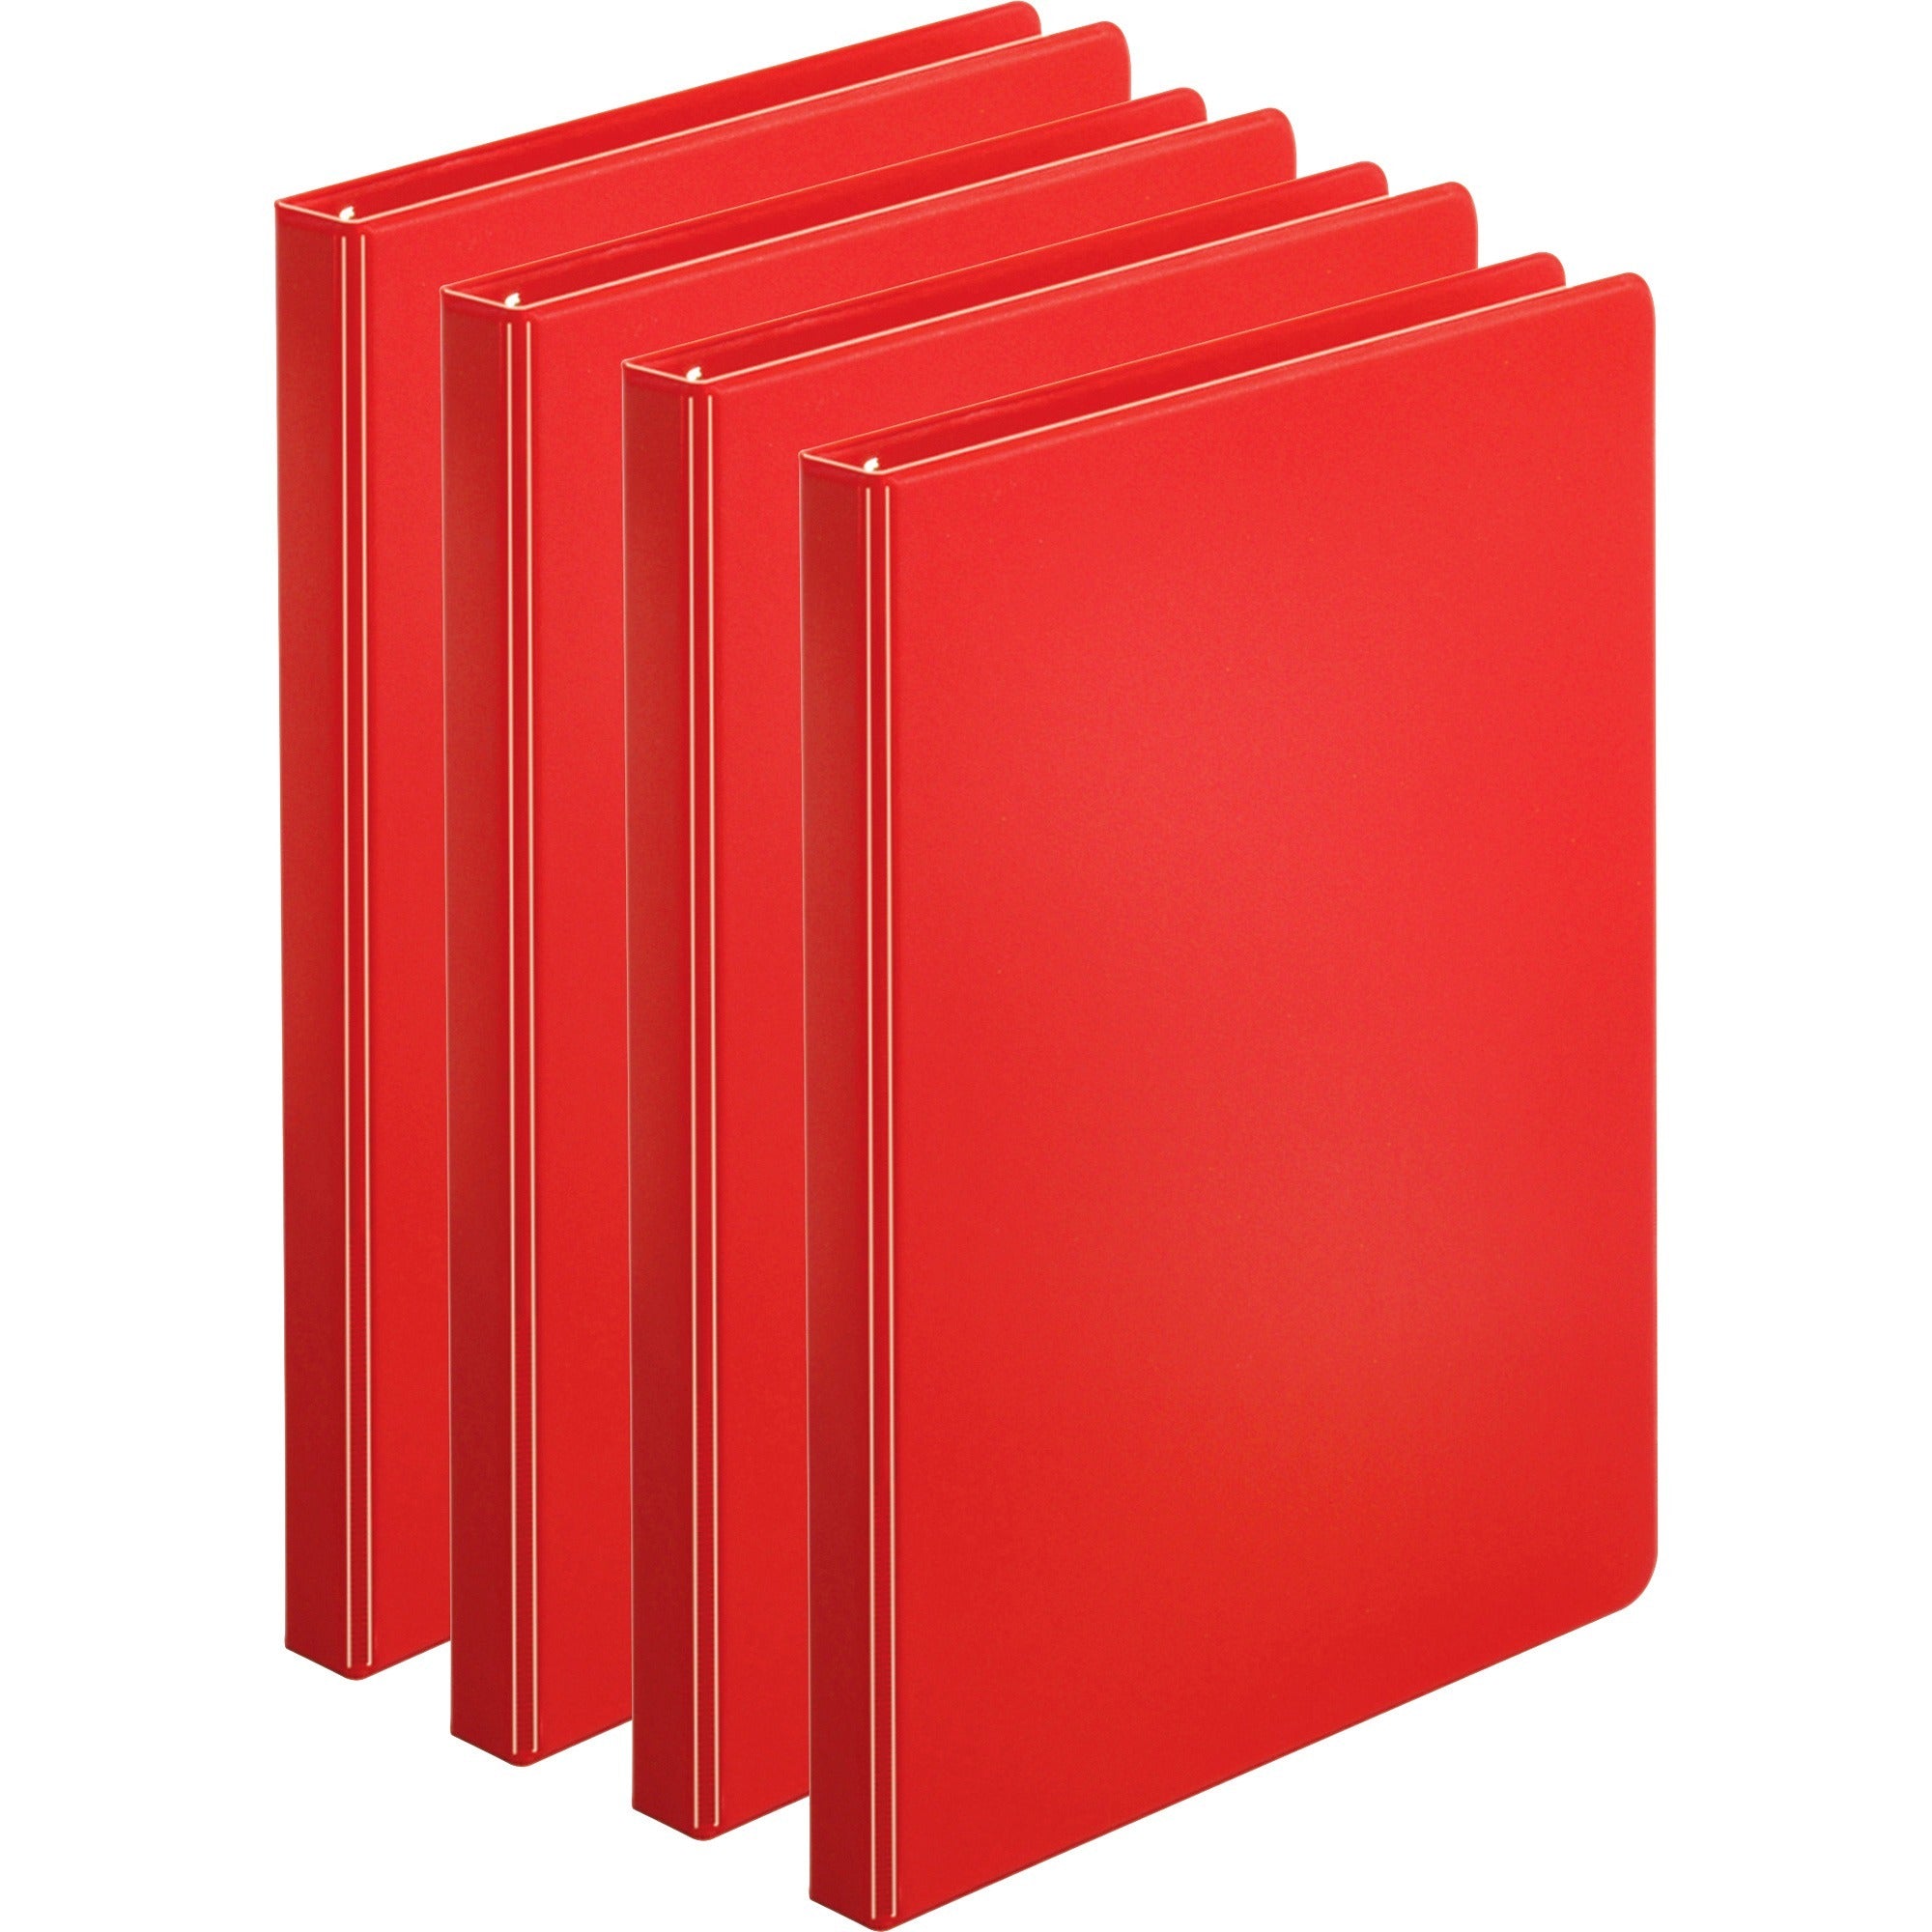 business-source-basic-round-ring-binders-1-2-binder-capacity-letter-8-1-2-x-11-sheet-size-125-sheet-capacity-3-x-round-ring-fasteners-internal-pockets-chipboard-polypropylene-red-exposed-rivet-sturdy-4-bundle_bsn28527bd - 1